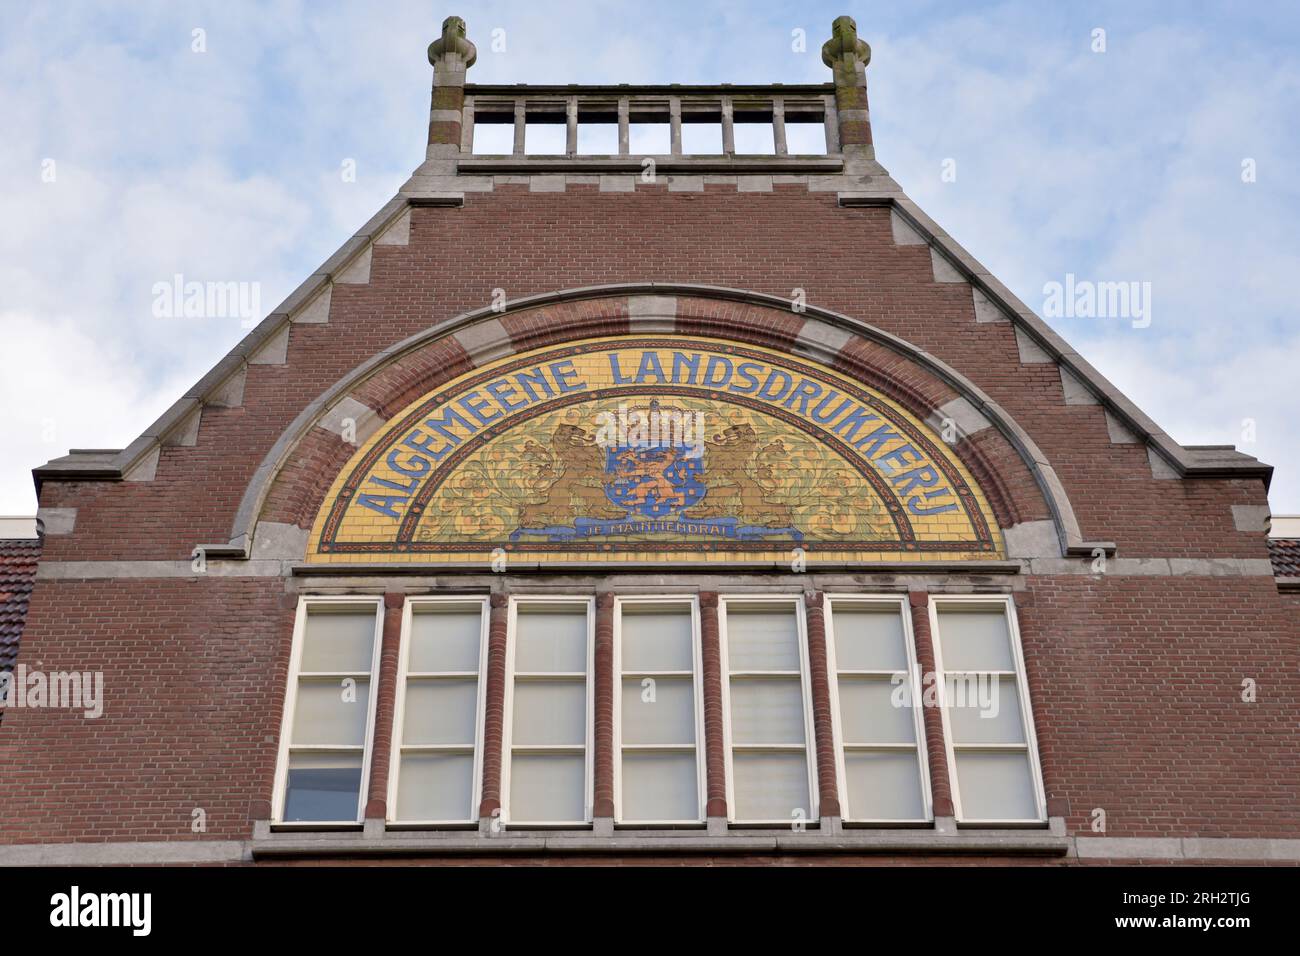 The former building of 'Algemeene Landsdrukkerij' on the Fluwelen Burgwal. The name is above the national coat of arms of the Netherlands Stock Photo